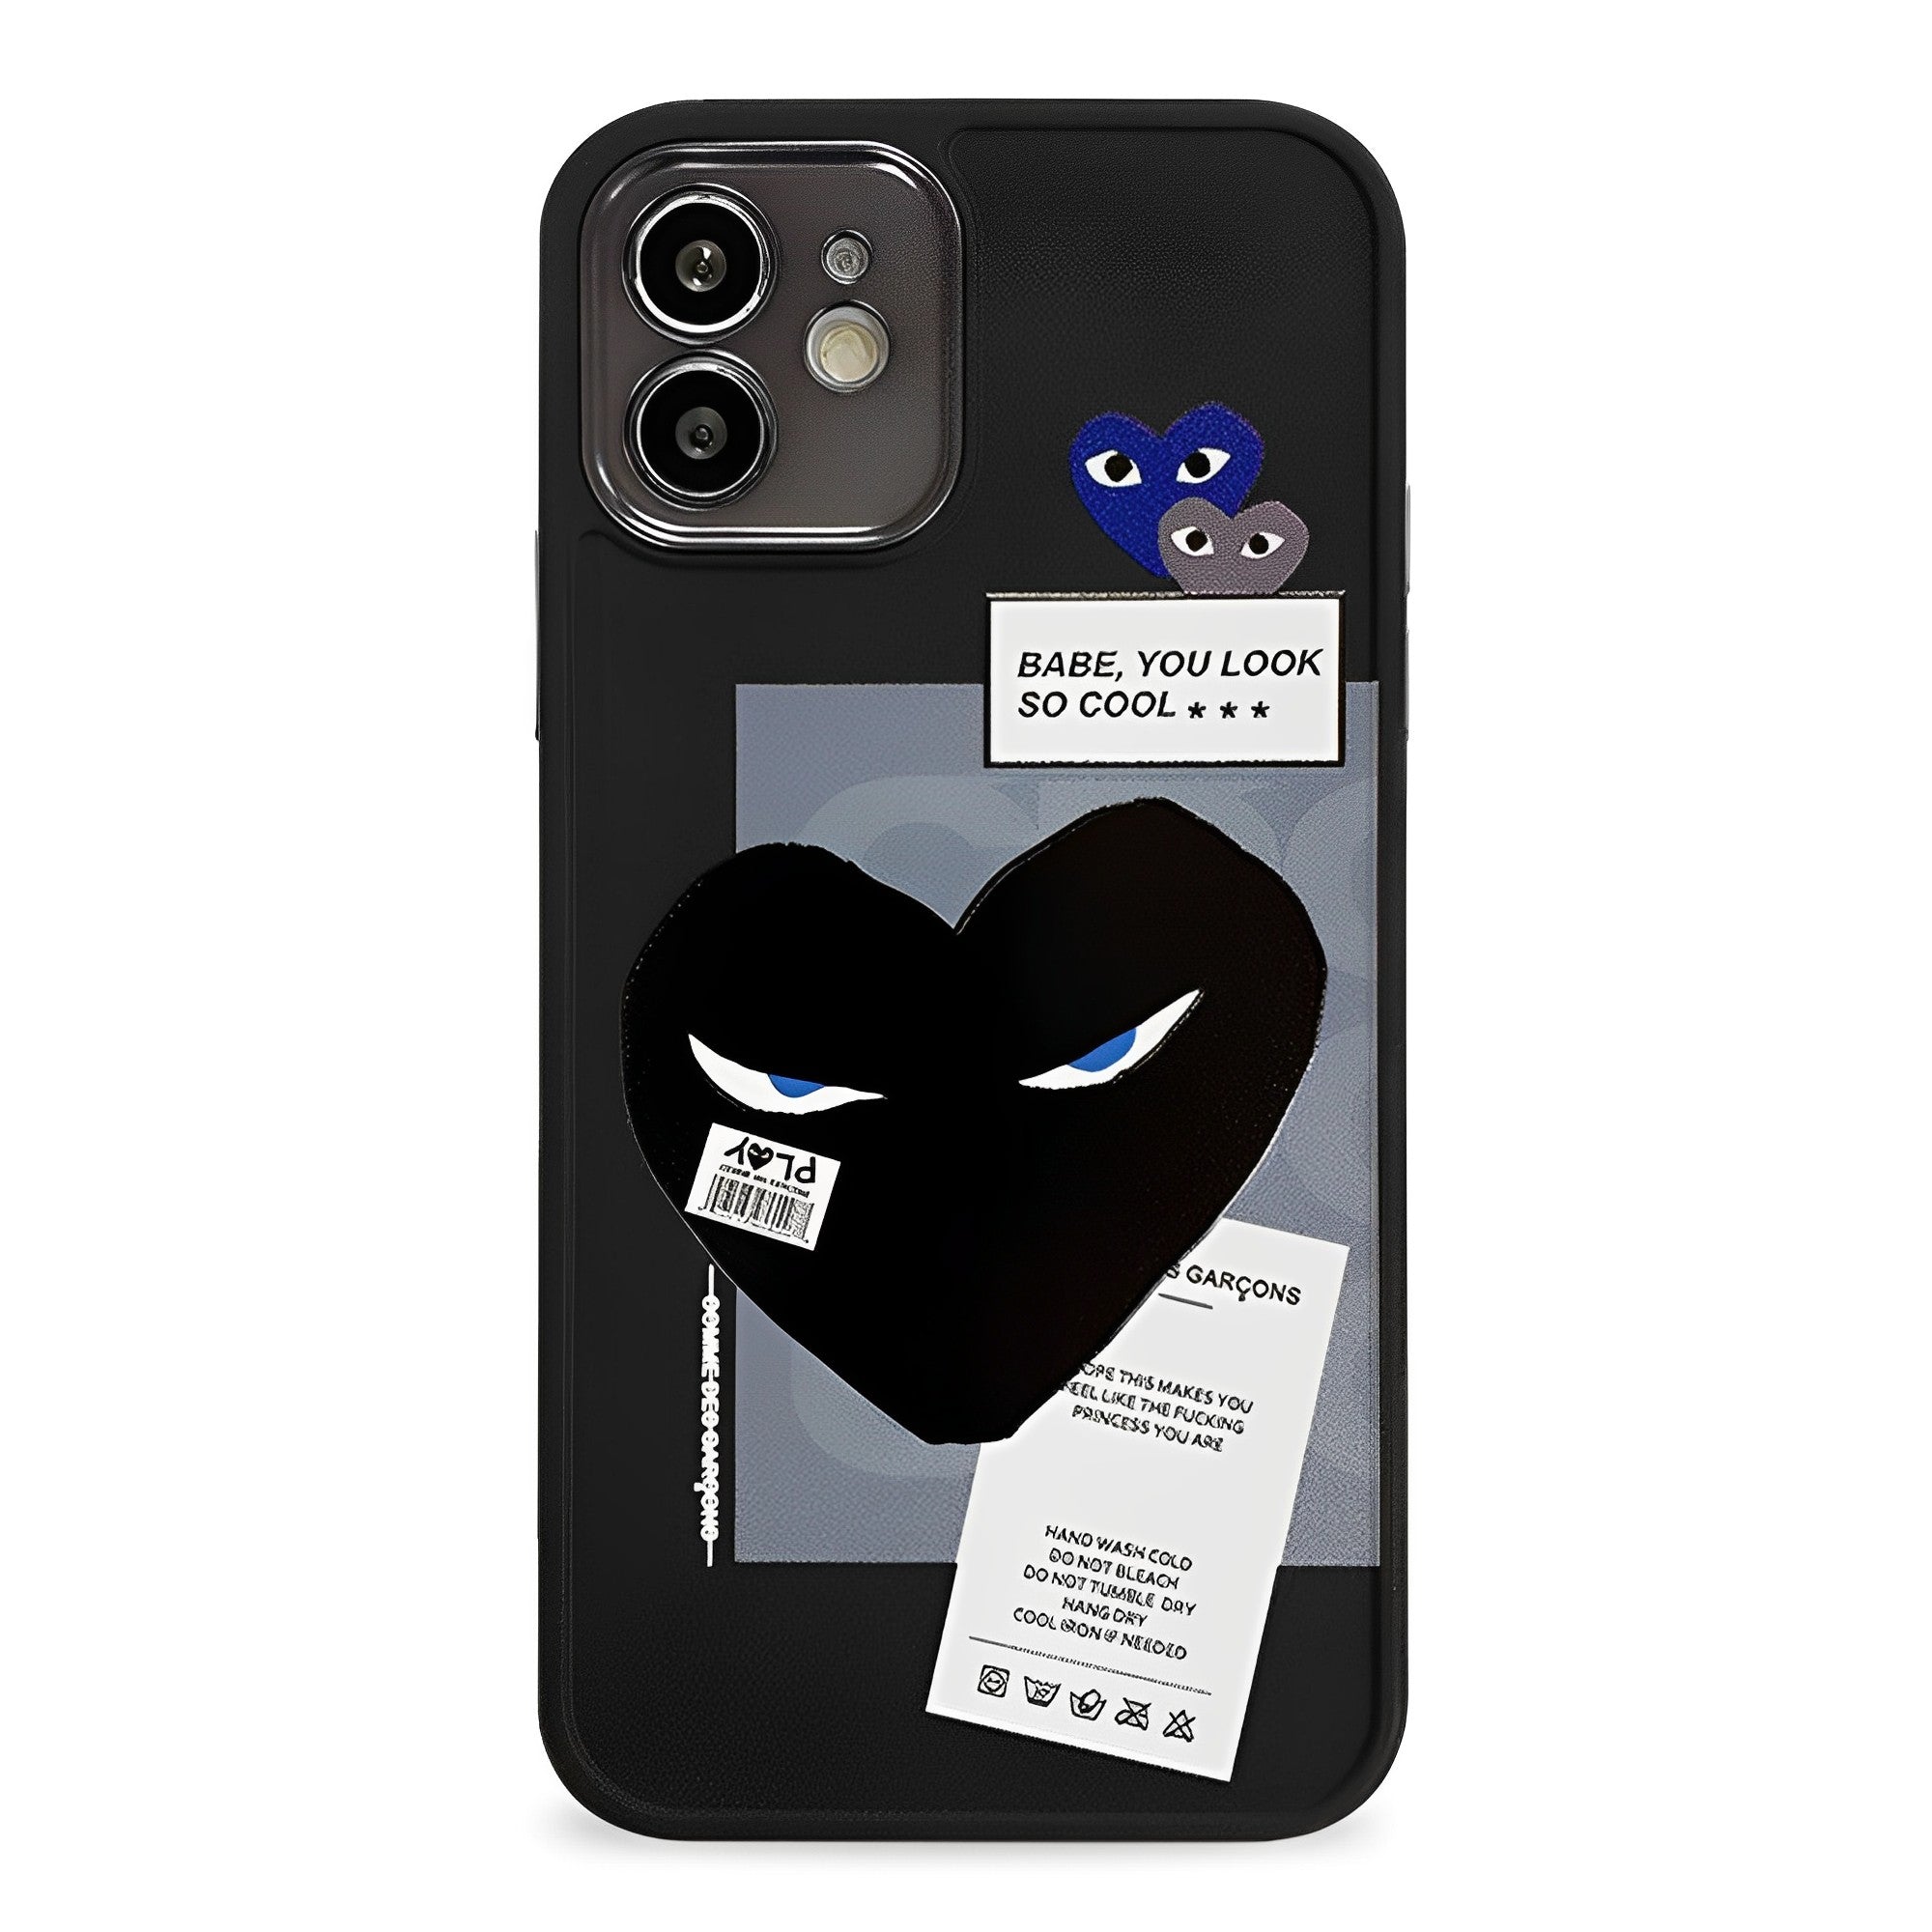 CDG iPhone Case